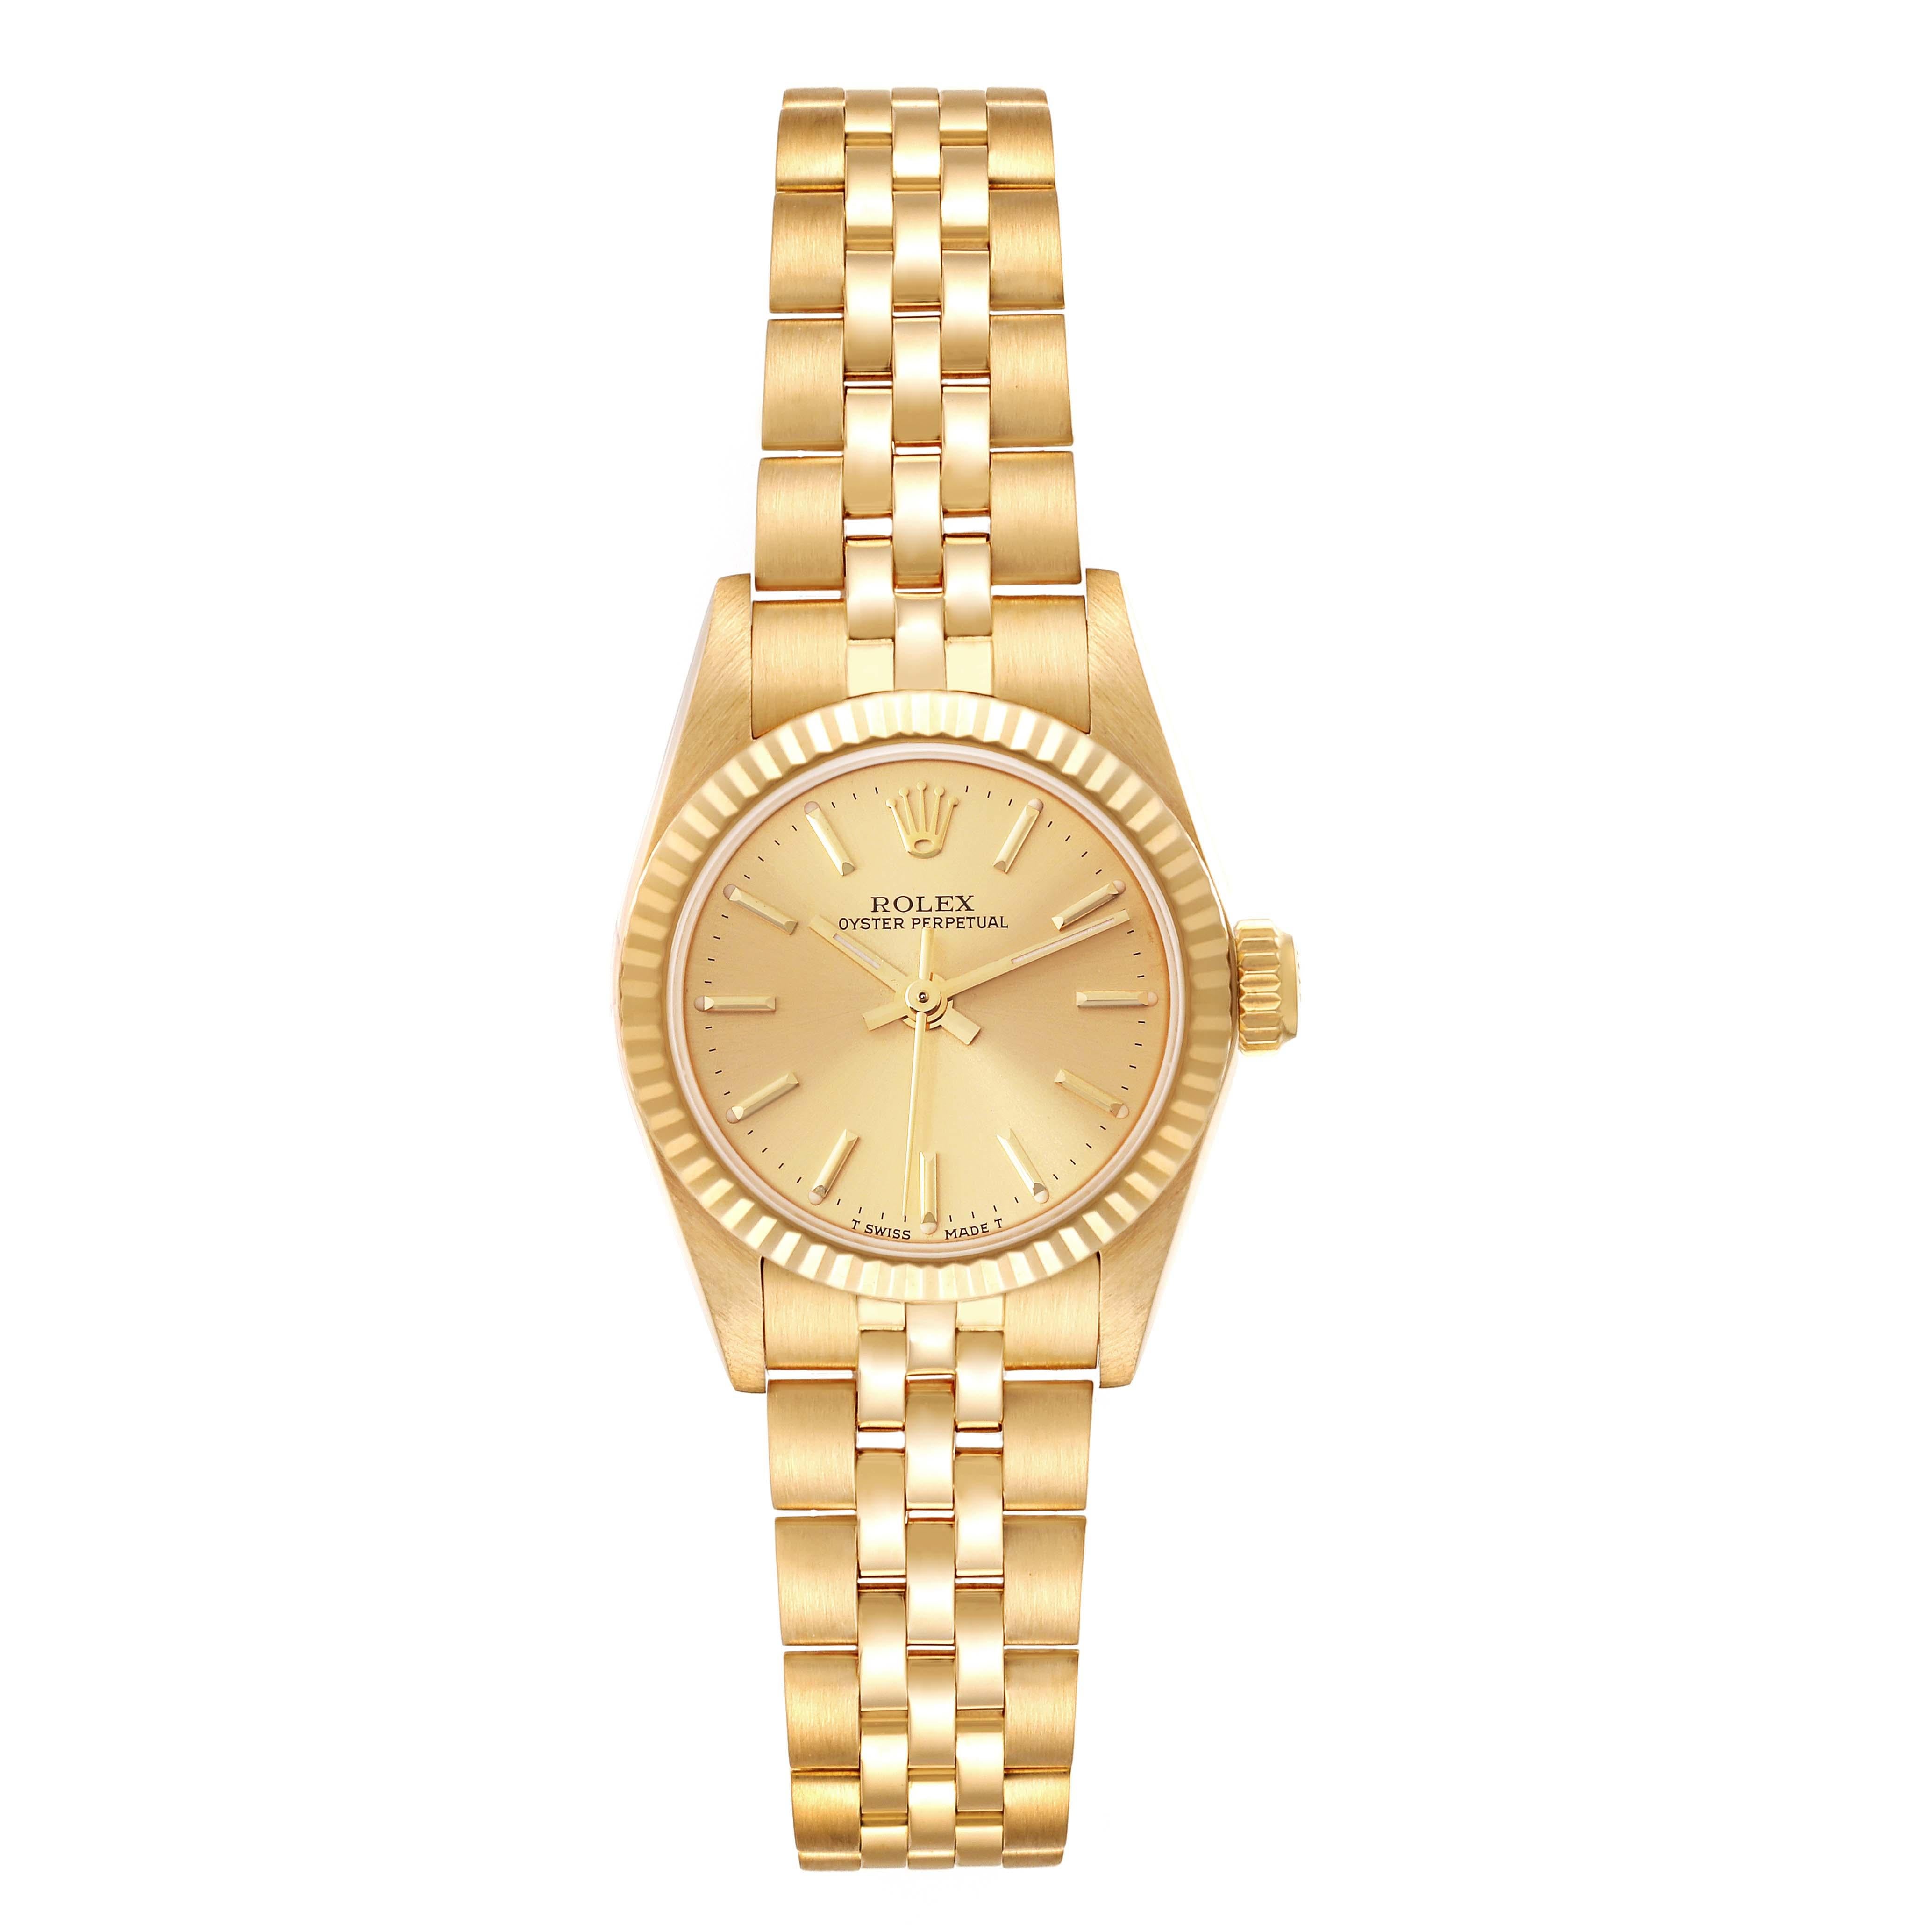 Rolex President No-Date Yellow Gold Jubilee Bracelet Ladies Watch 67198. Automatic self-winding movement. 14k yellow gold oyster case 24.0 mm in diameter. Rolex logo on a crown. 18k yellow gold fluted bezel. Scratch resistant sapphire crystal.